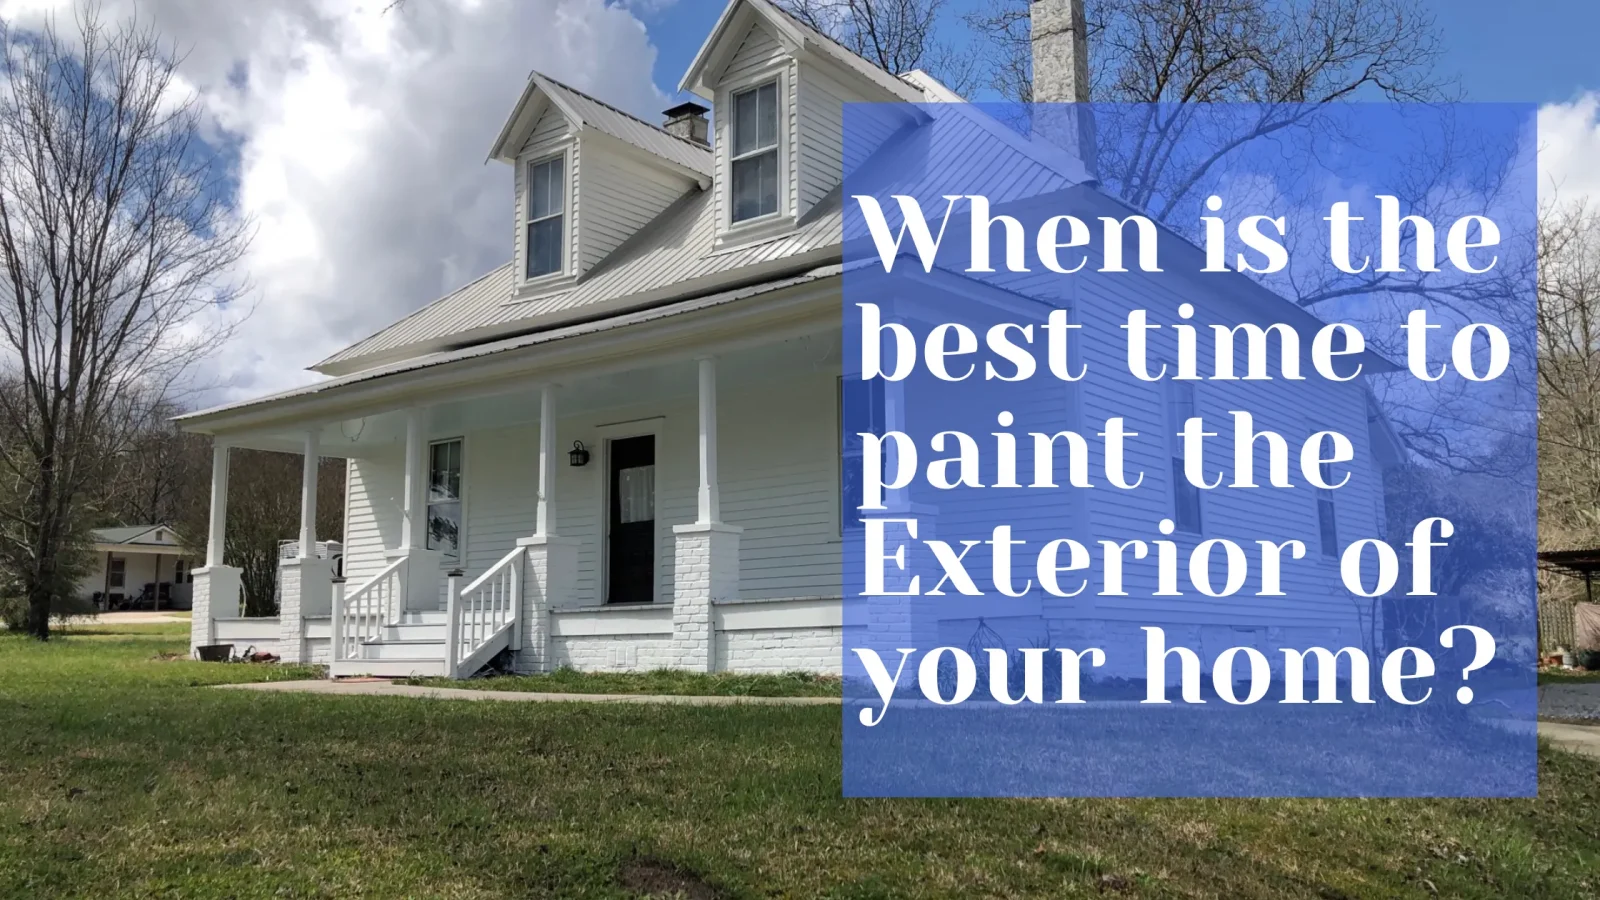 When is the best time to paint the Exterior of your home